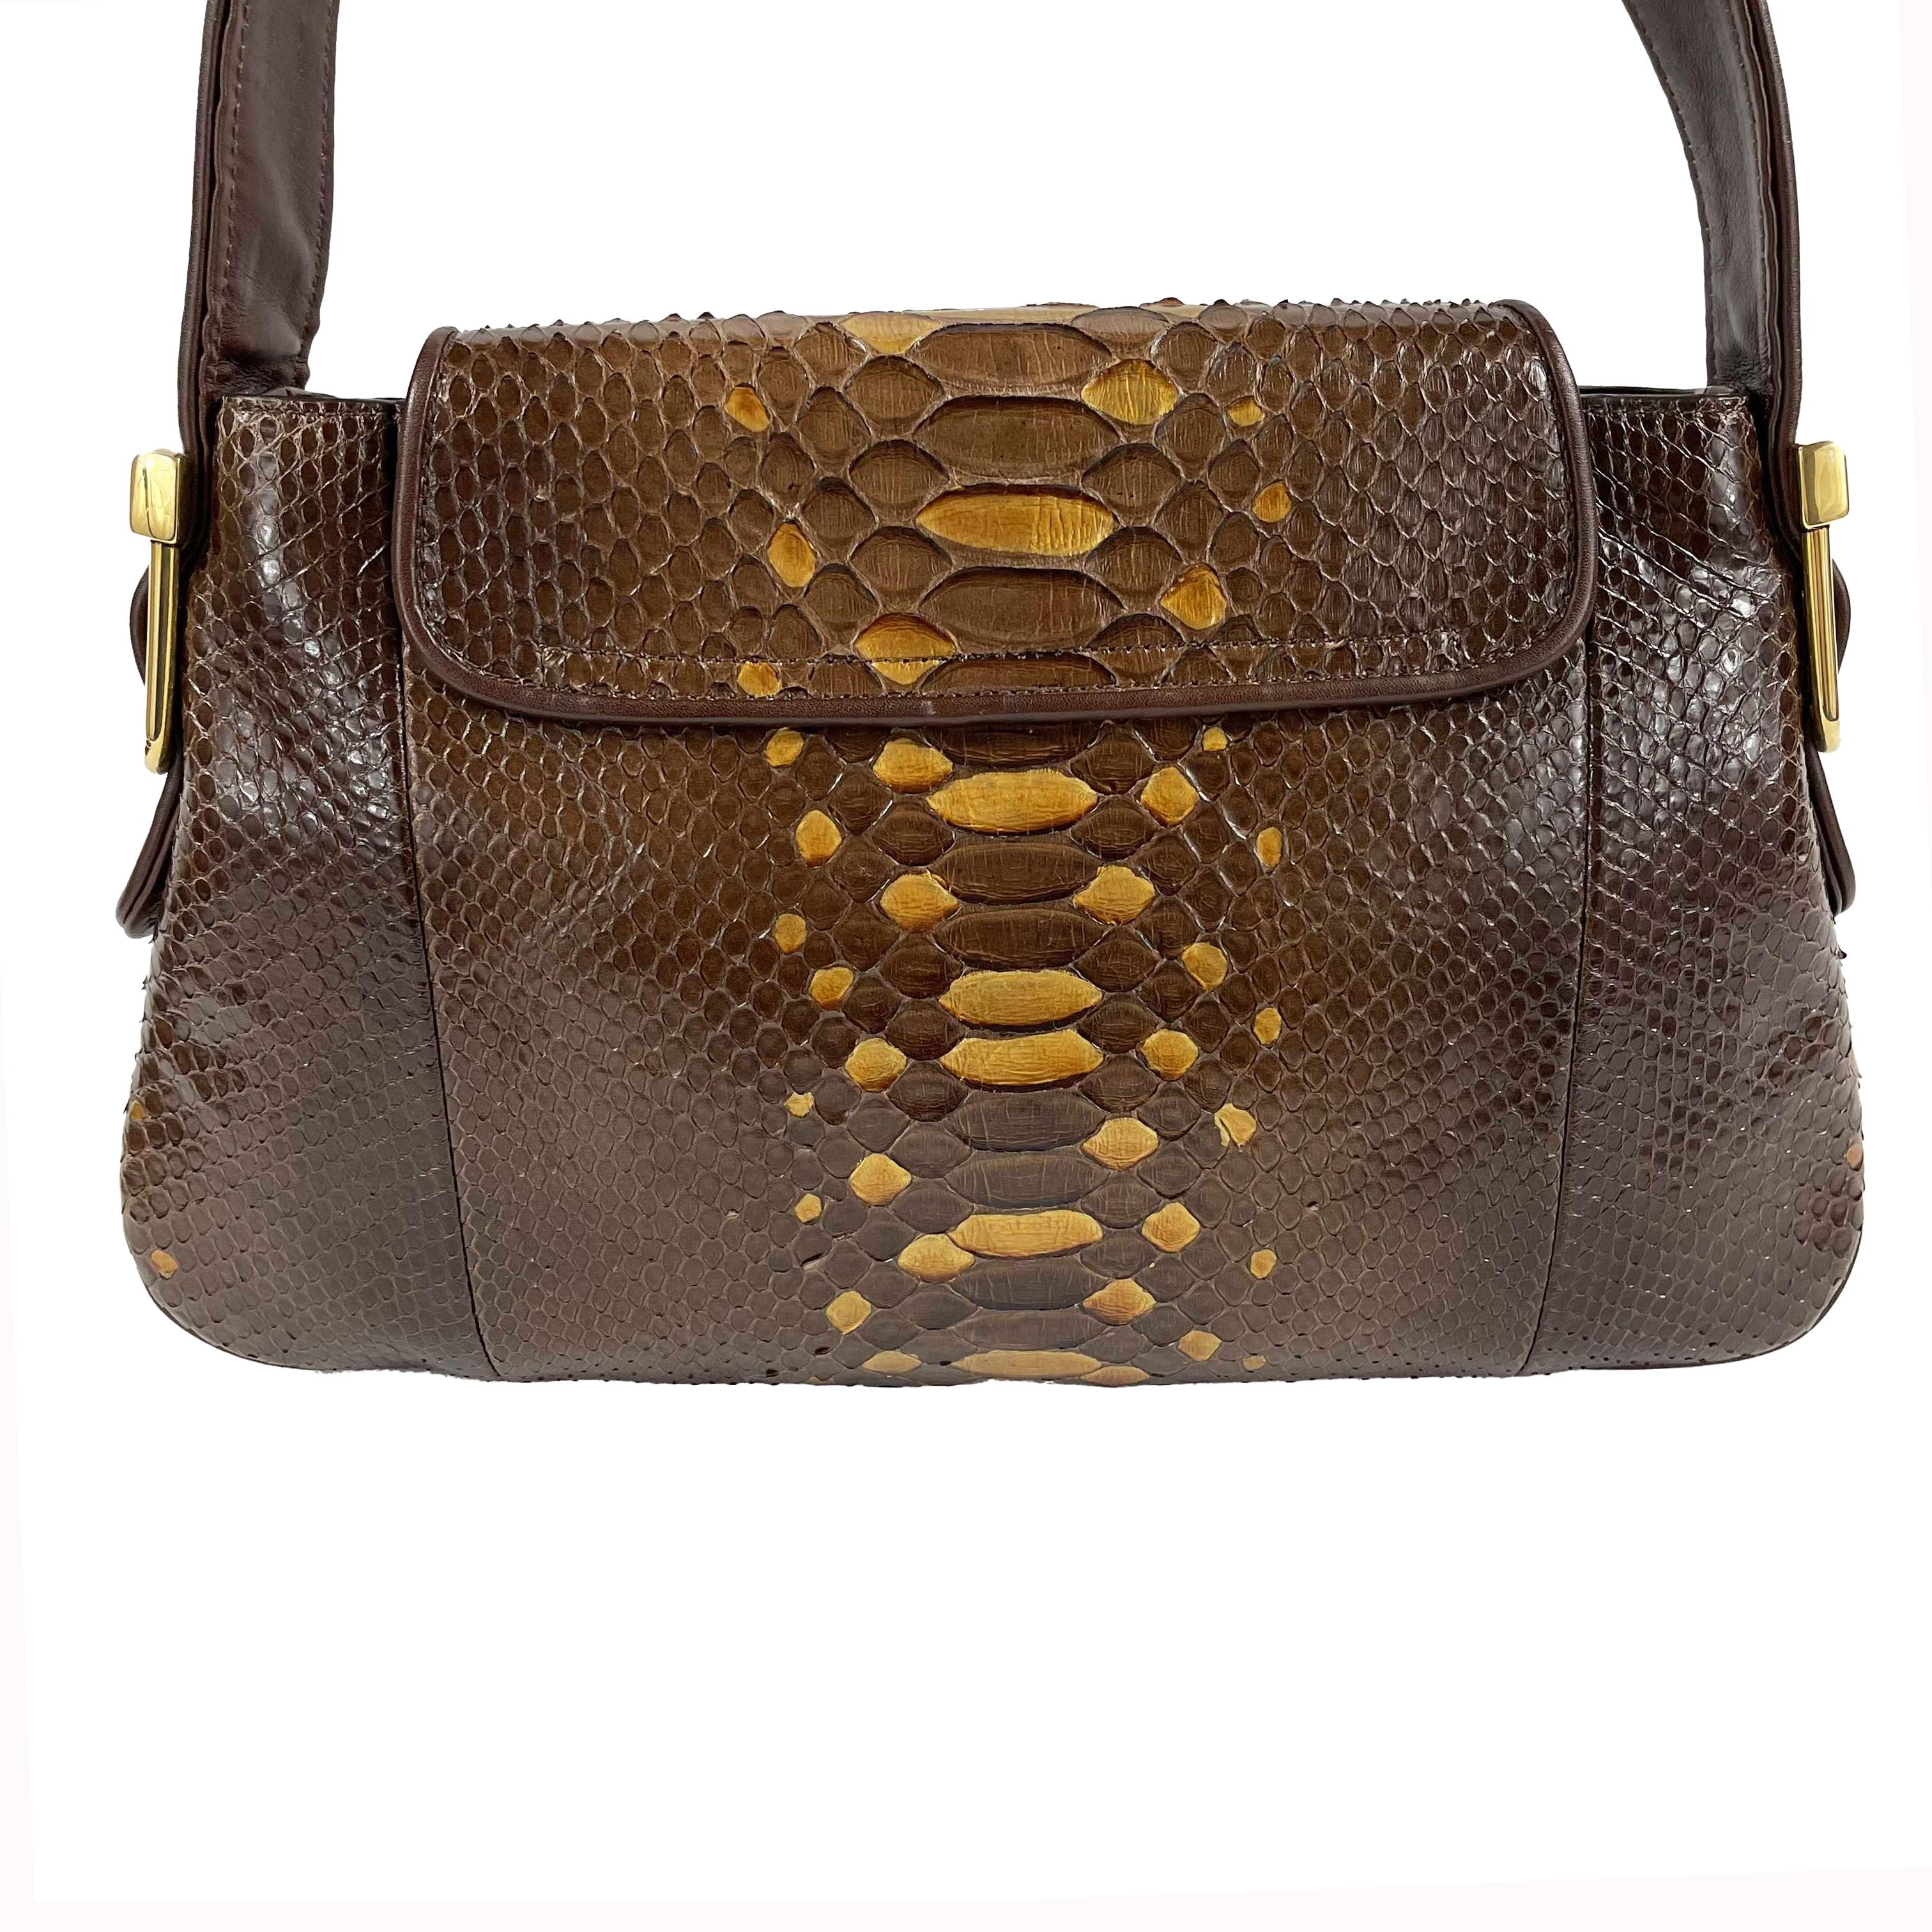 Gucci - Excellent - 1973 Python Metallic Accent  Shoulder - Brown - Handbag

Description

Fall Winter 2010 Collection.
Creative Director Frida Giannini sourced inspiration from the Gucci archives dating back to 1973 for the new impeccable and